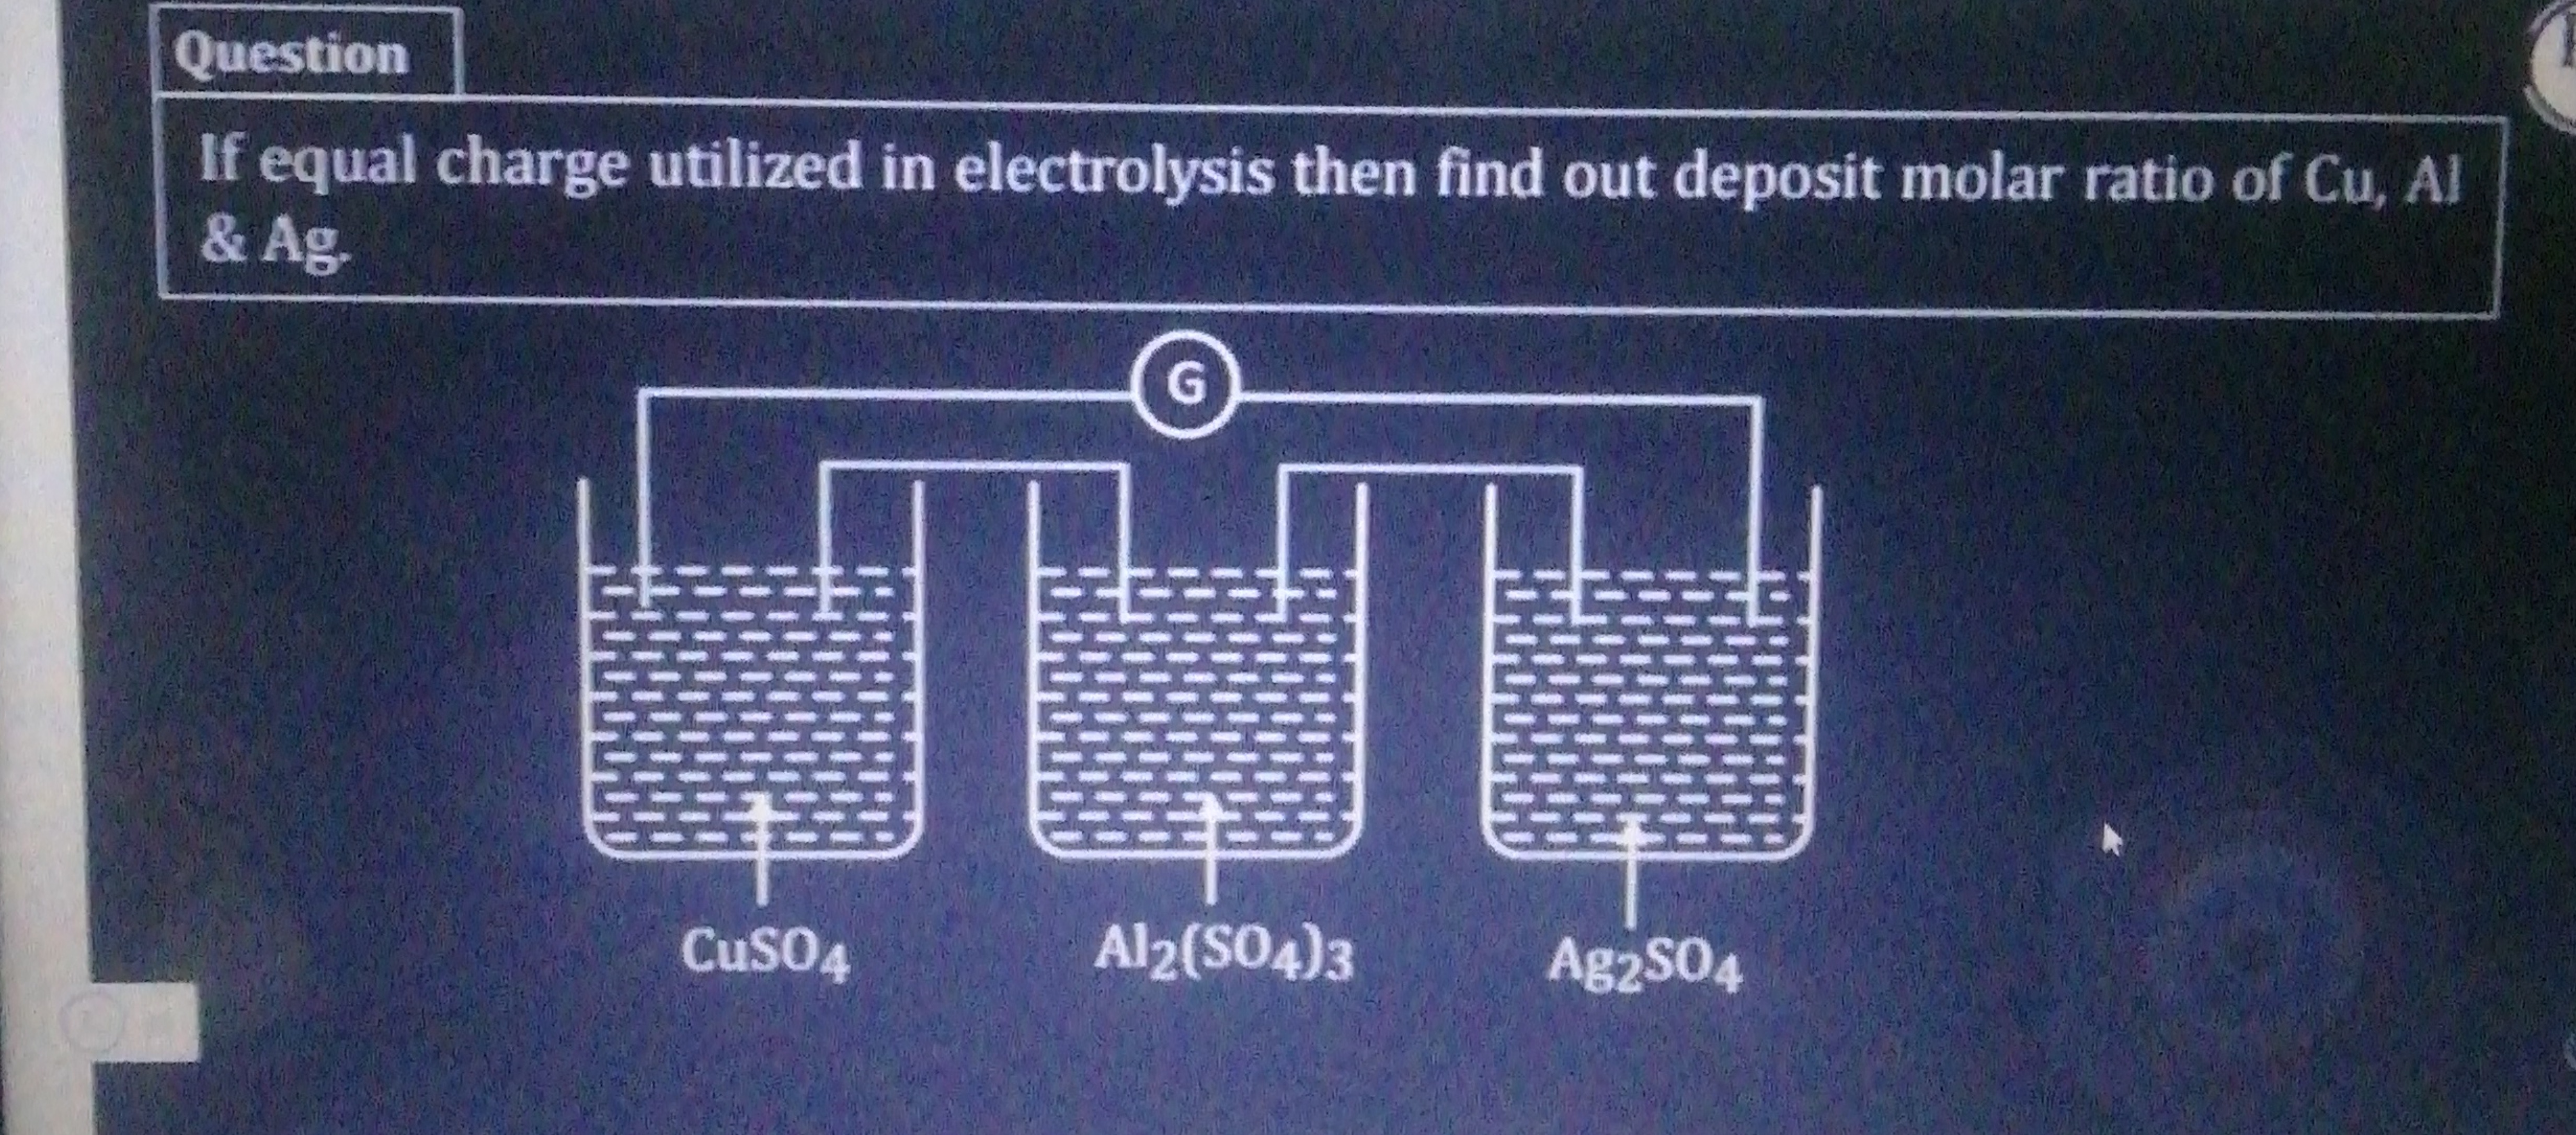 Question
If equal charge utilized in electrolysis then find out deposi